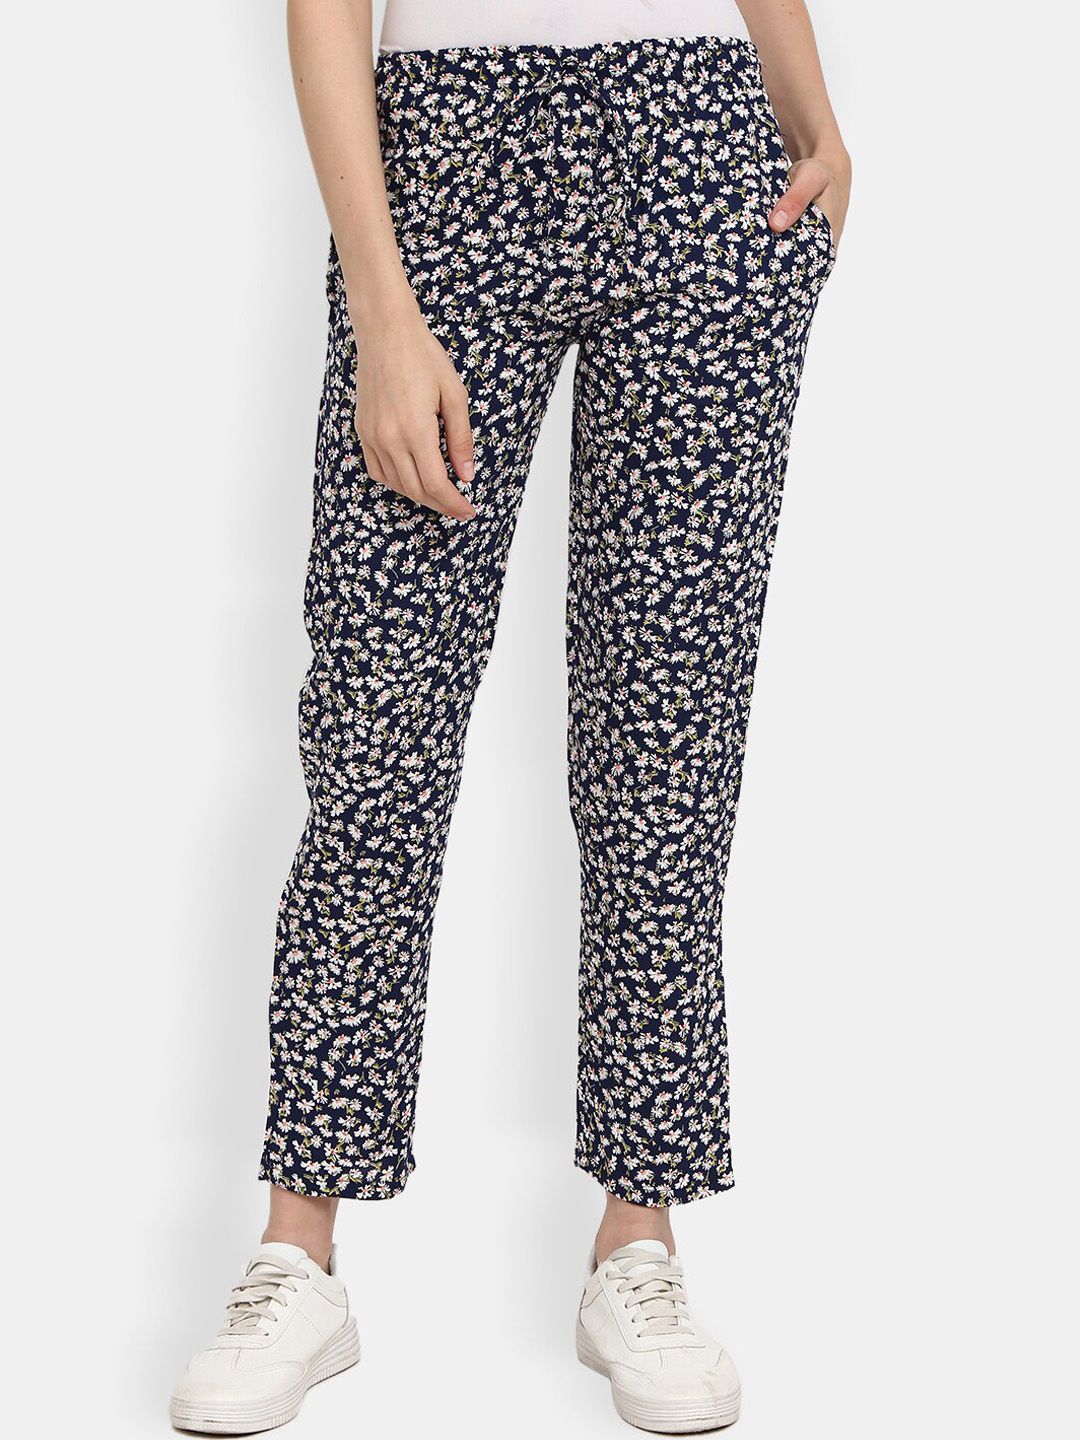 V-Mart Women Navy Blue Floral Printed Lounge Pants Price in India